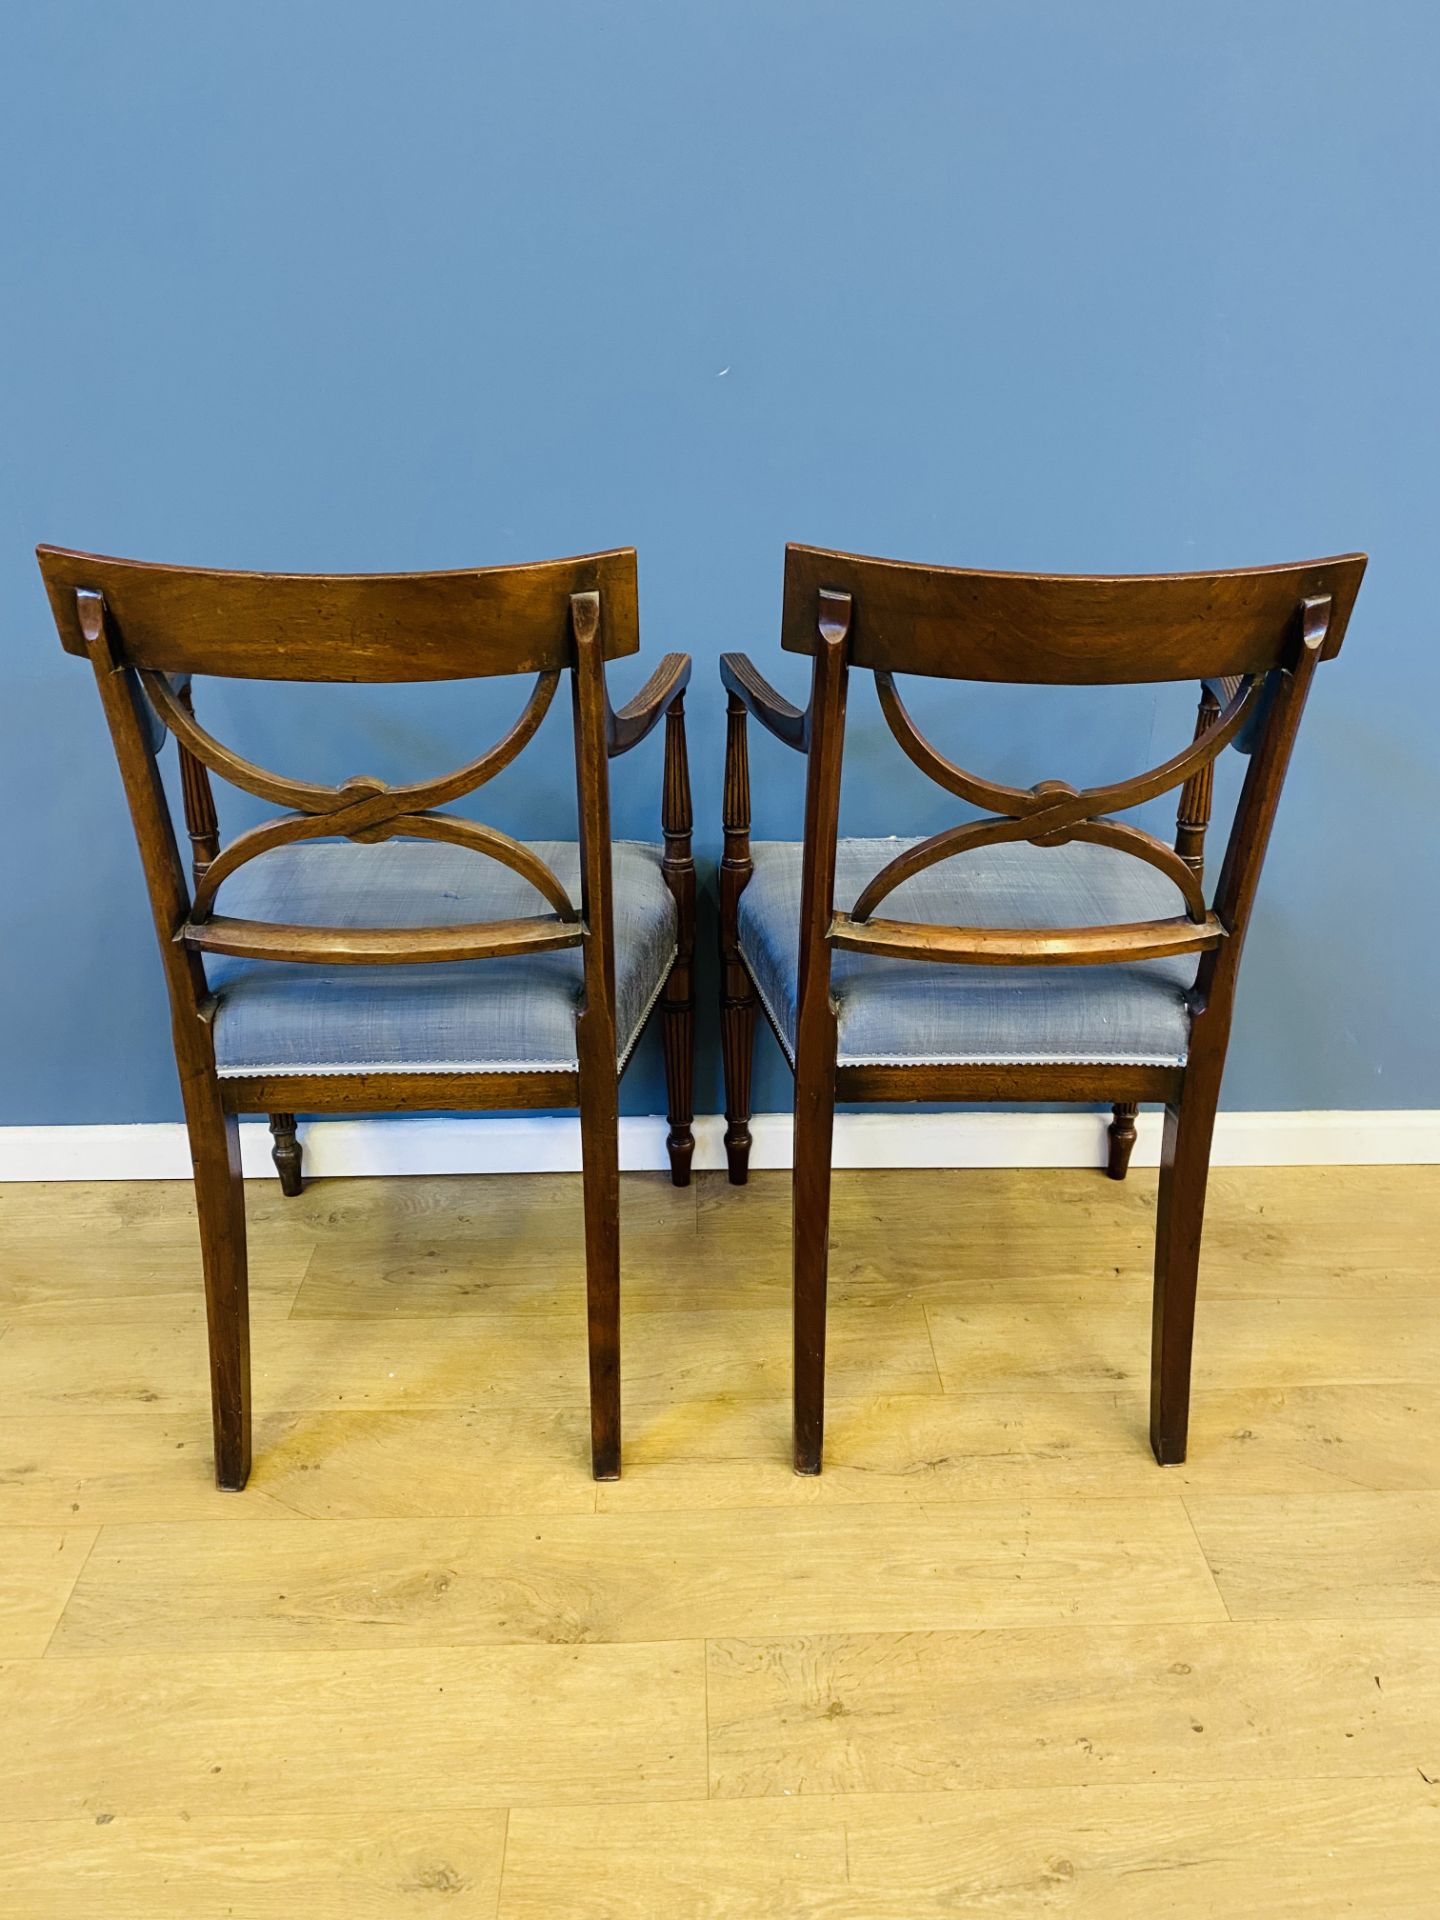 Pair of mahogany open armchairs - Image 5 of 5